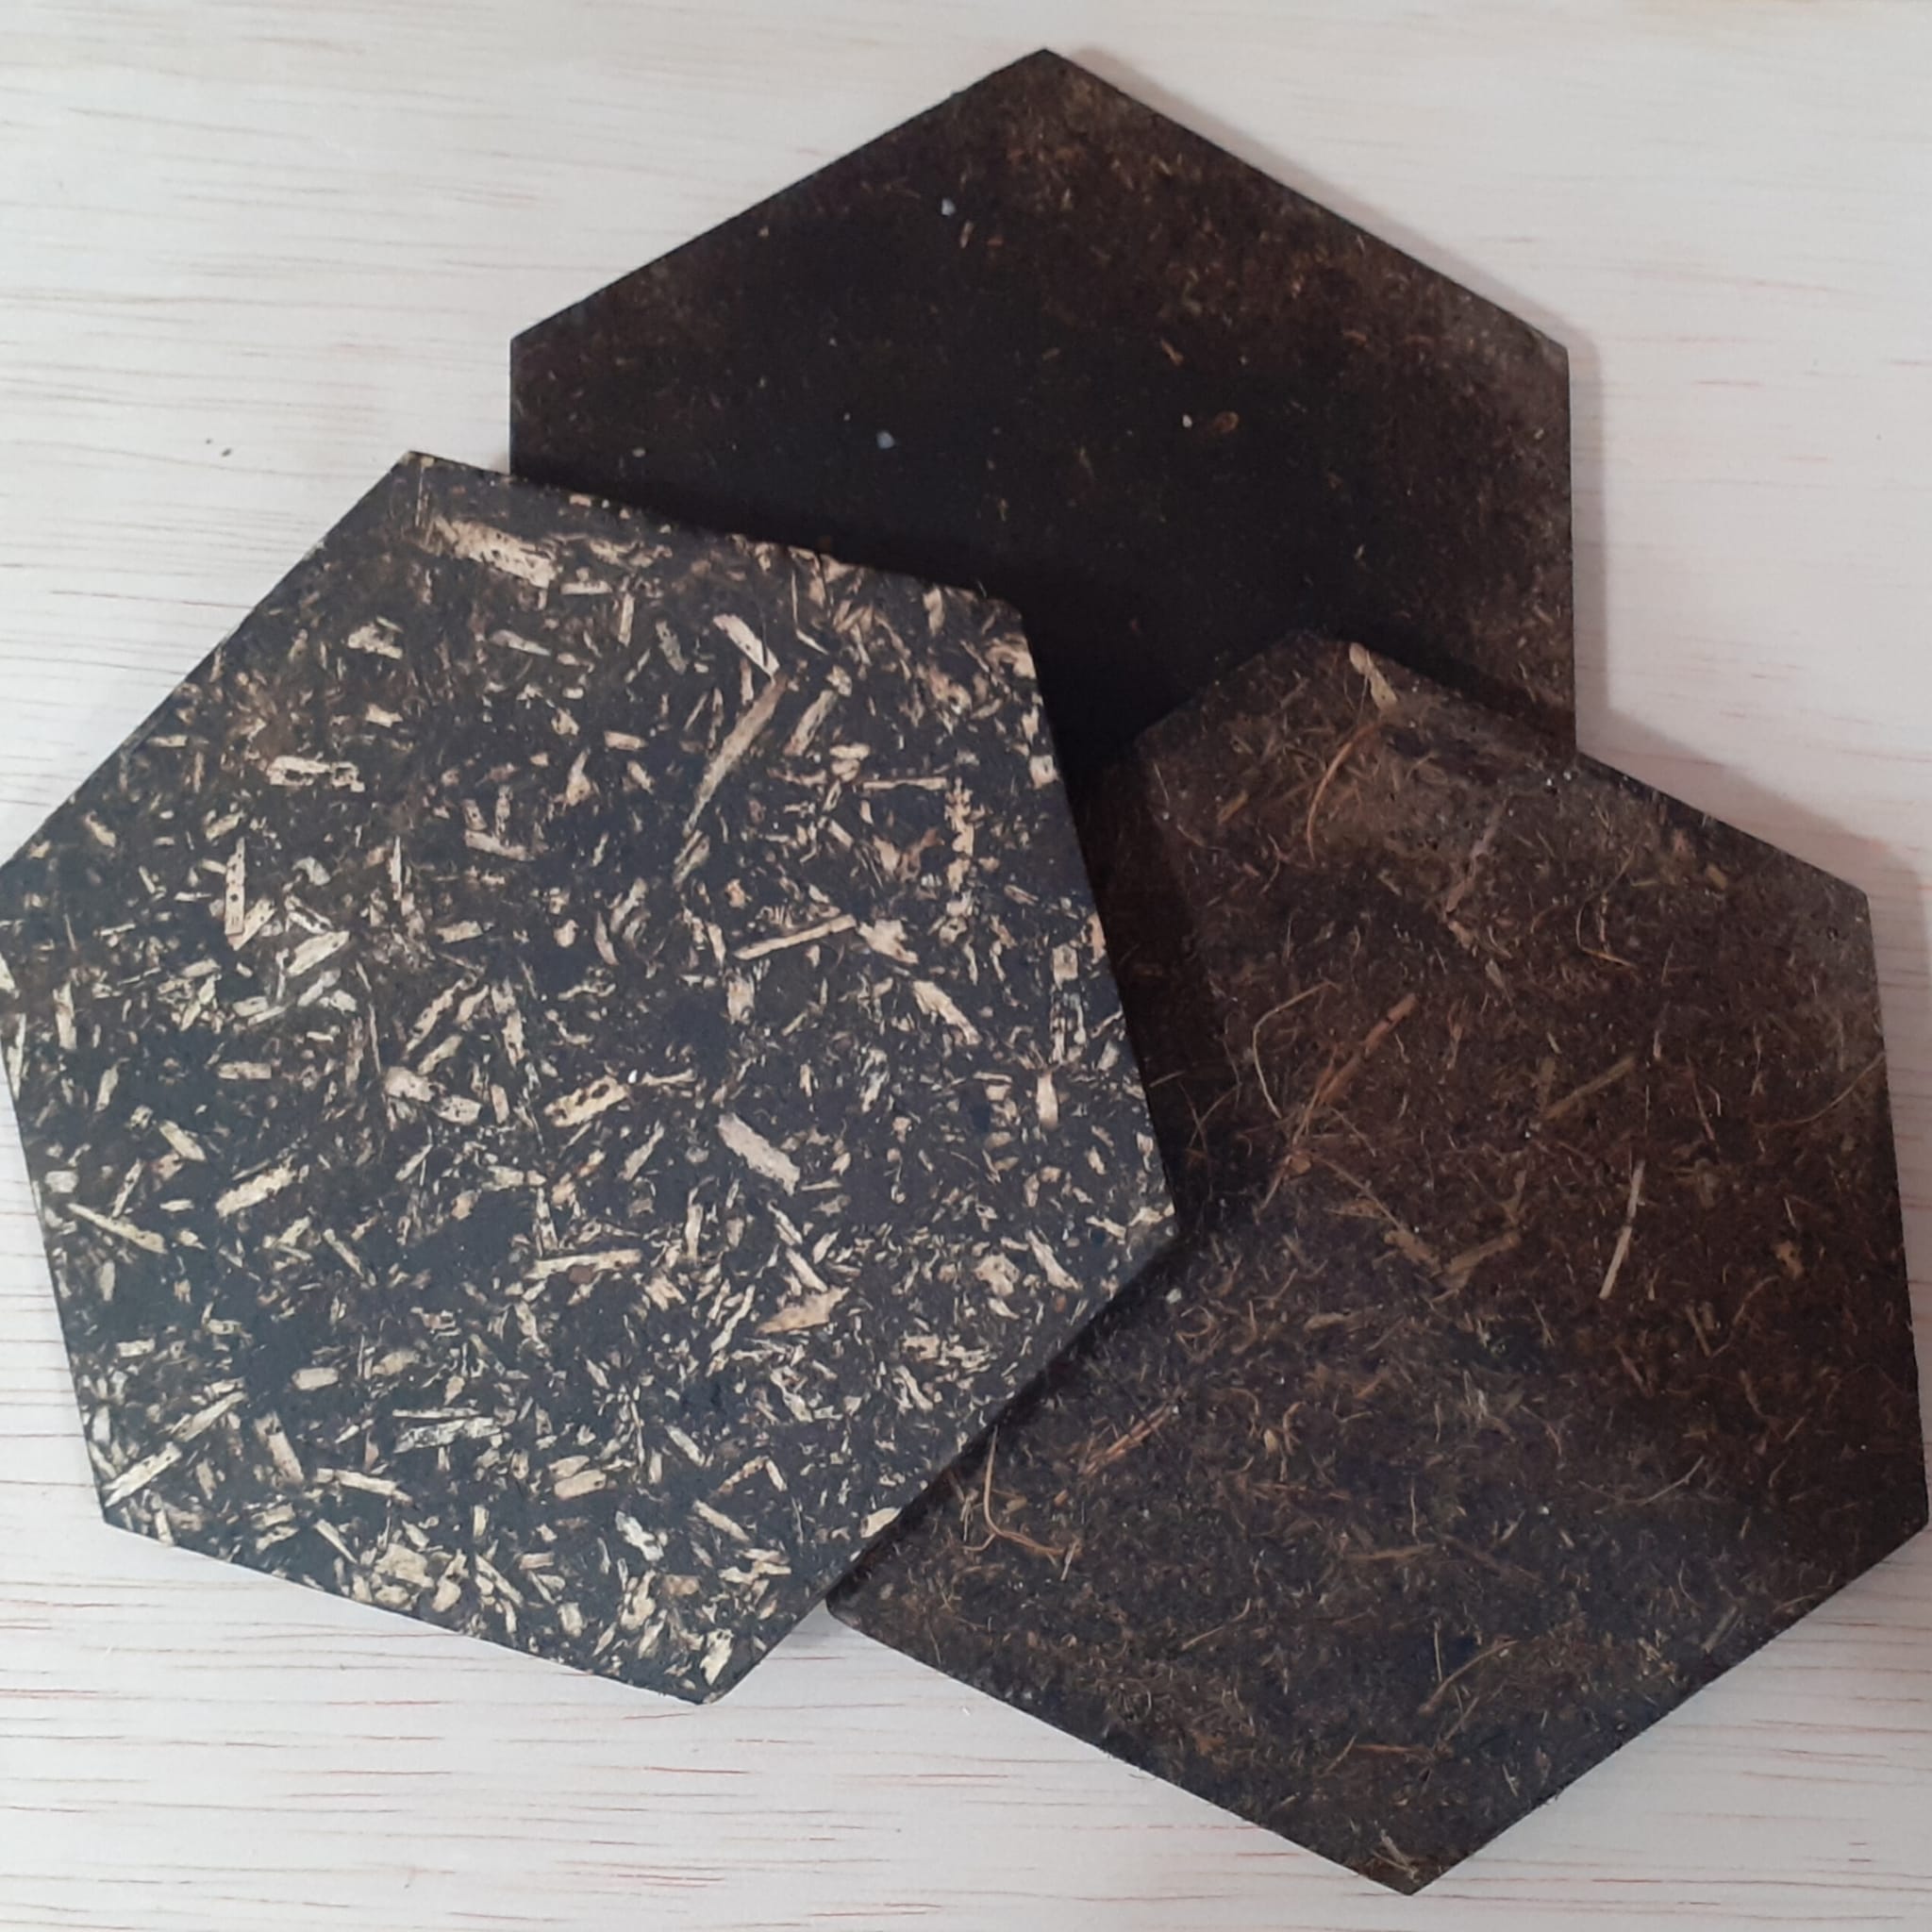 biobased tiles made of cowdung